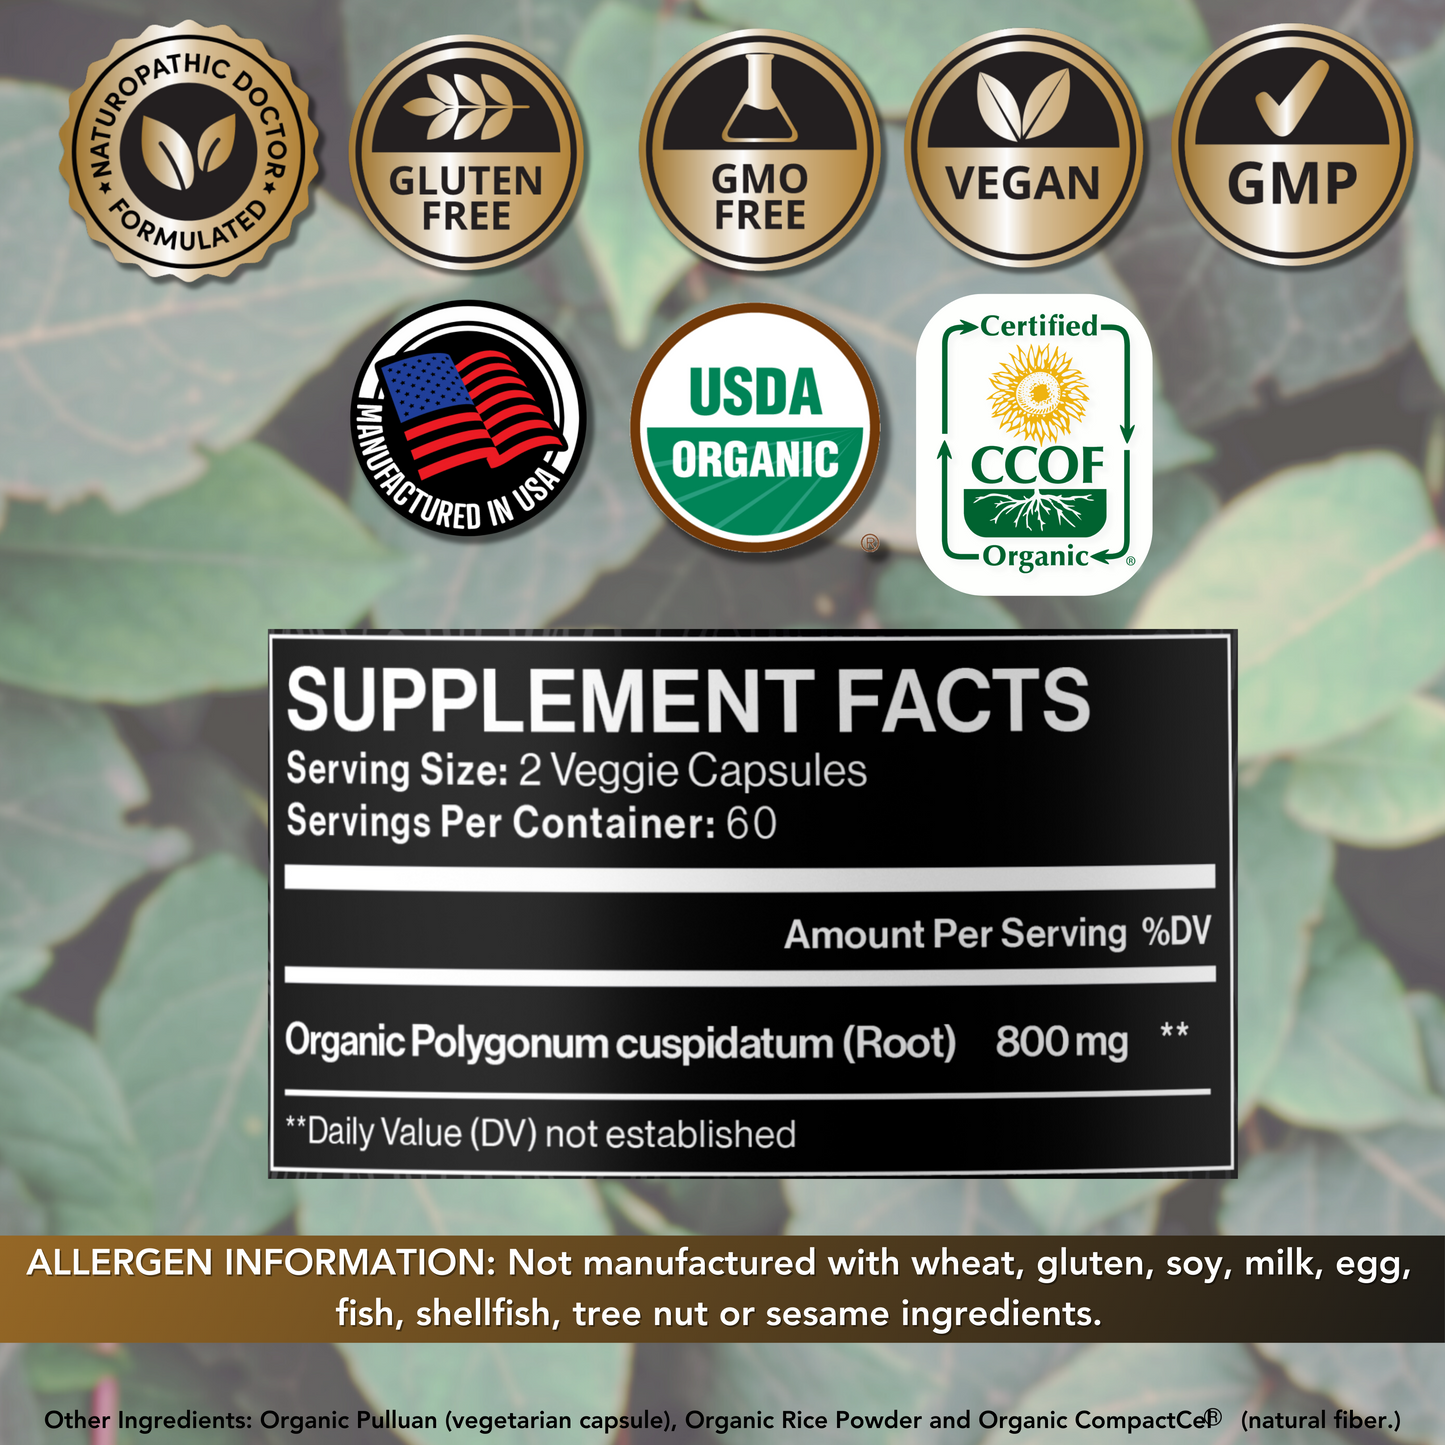 JAPANESE KNOTWEED SUPPLEMENT